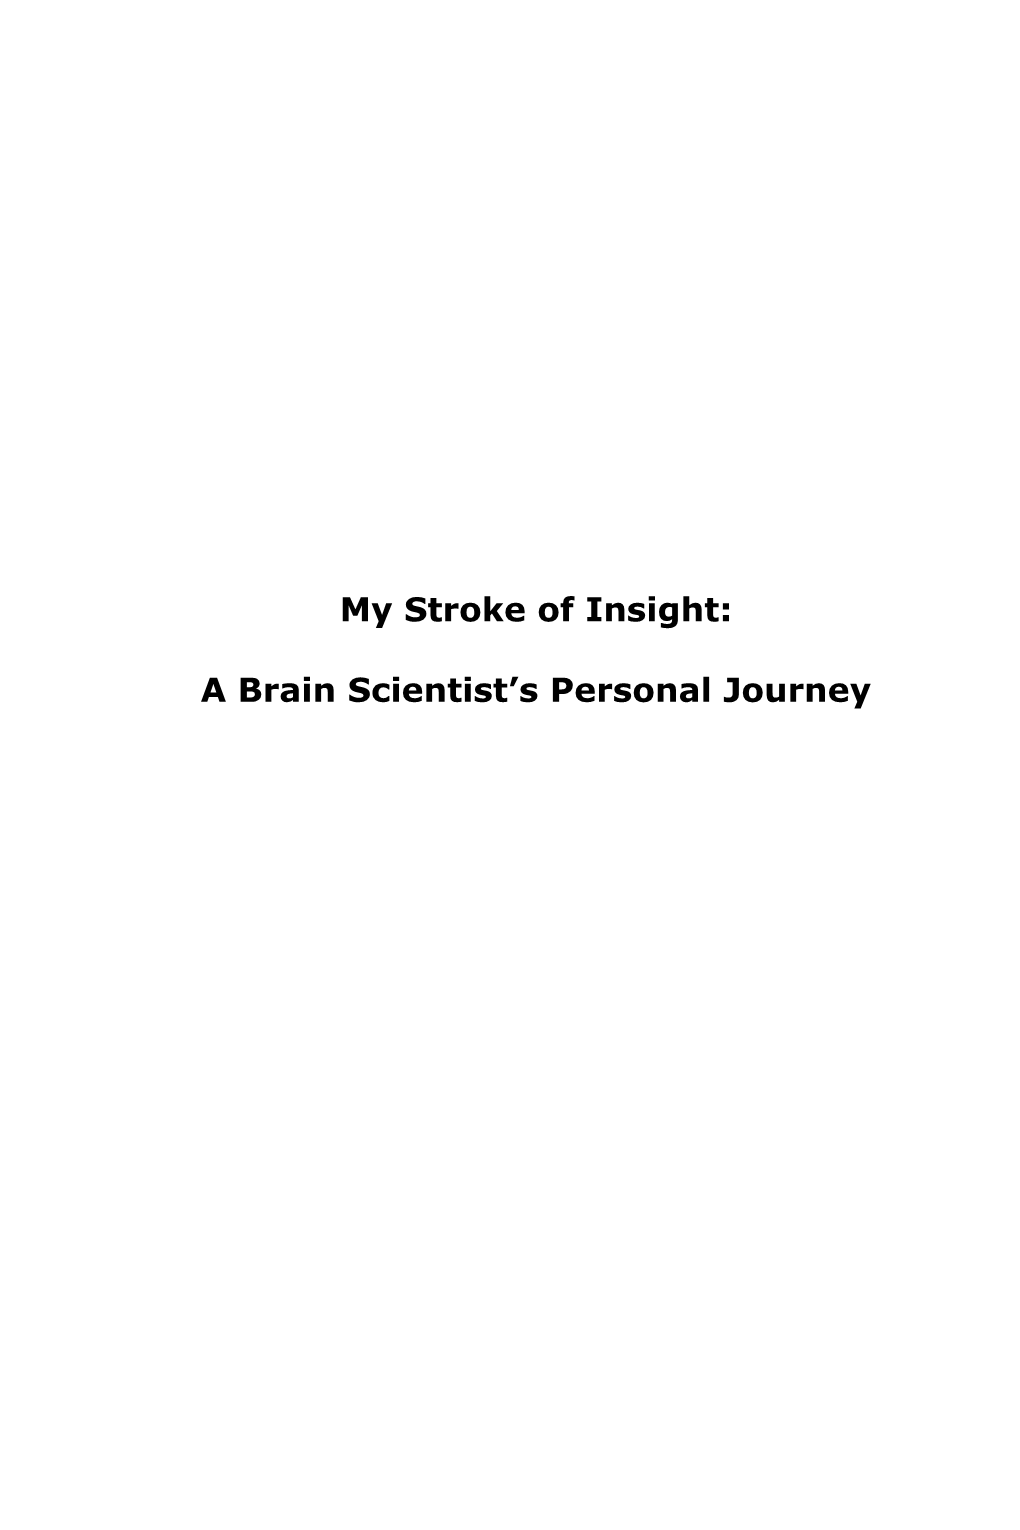 My Stroke of Insight: a Brain Scientist's Personal Journey